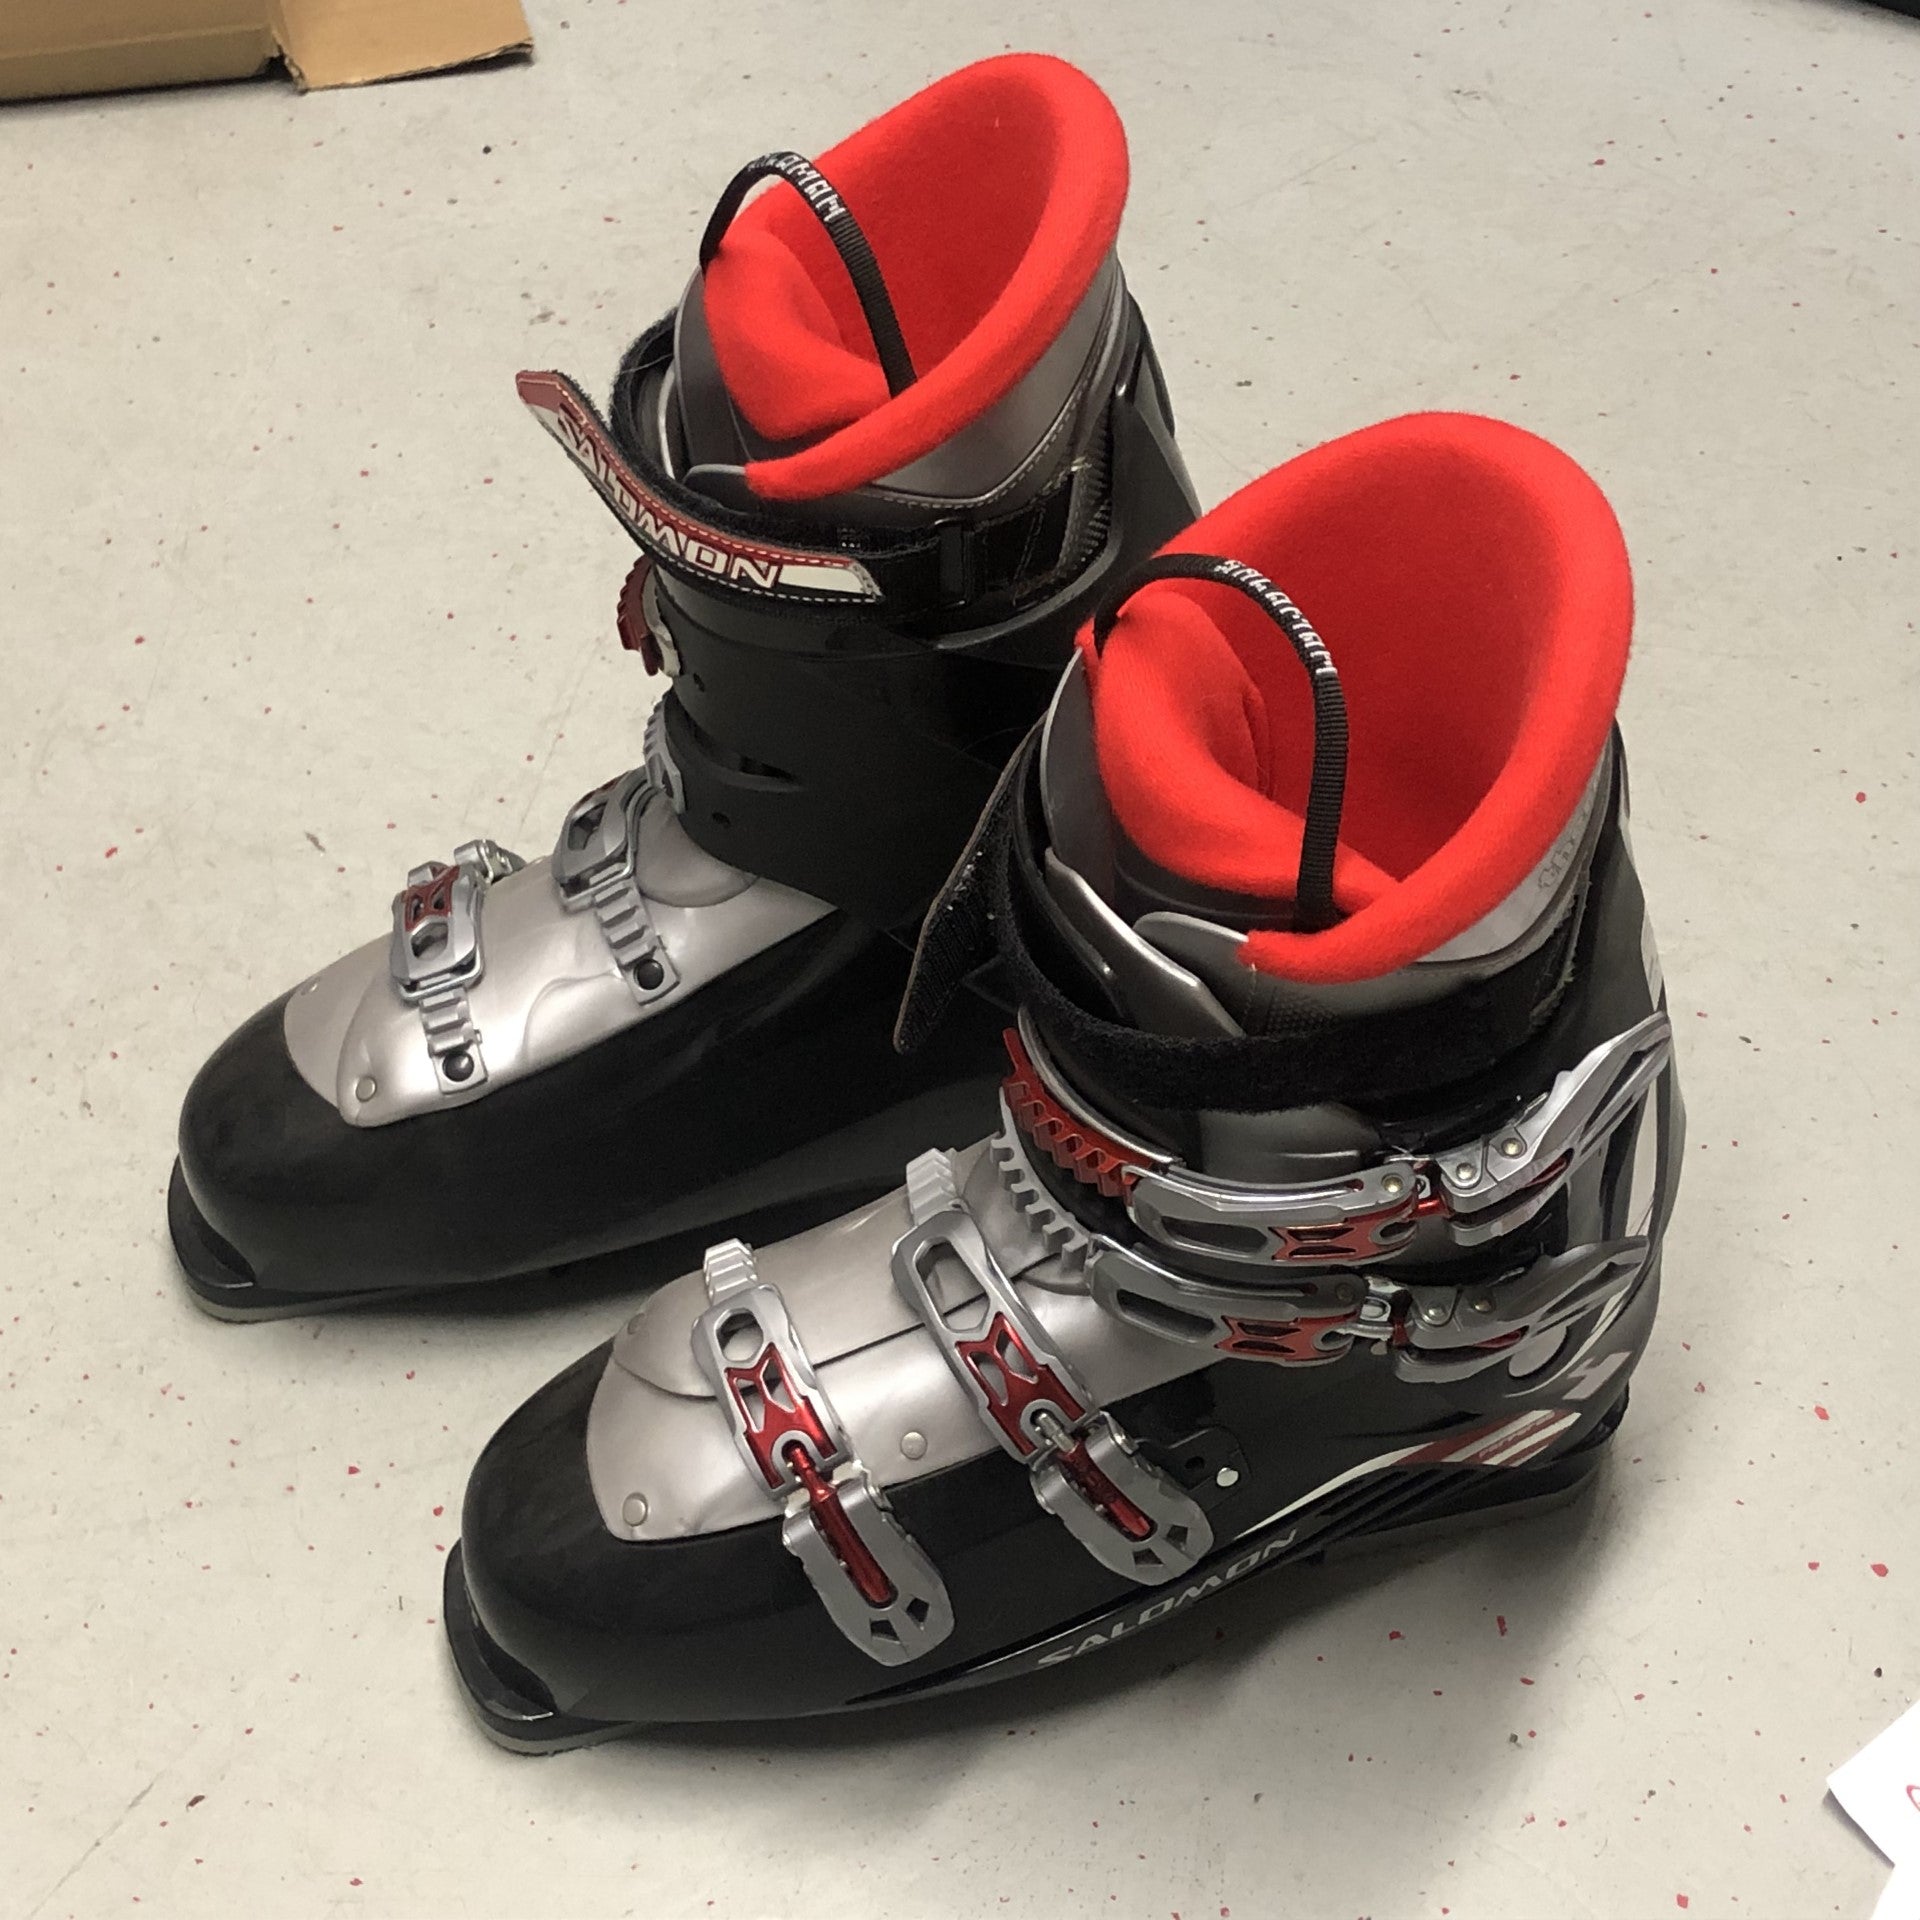 Salomon Thermafit Ski Boots Sz 31.5 Blk/Red/Gry-Sports Replay - Sports Excellence-Sports Replay - Sports Excellence